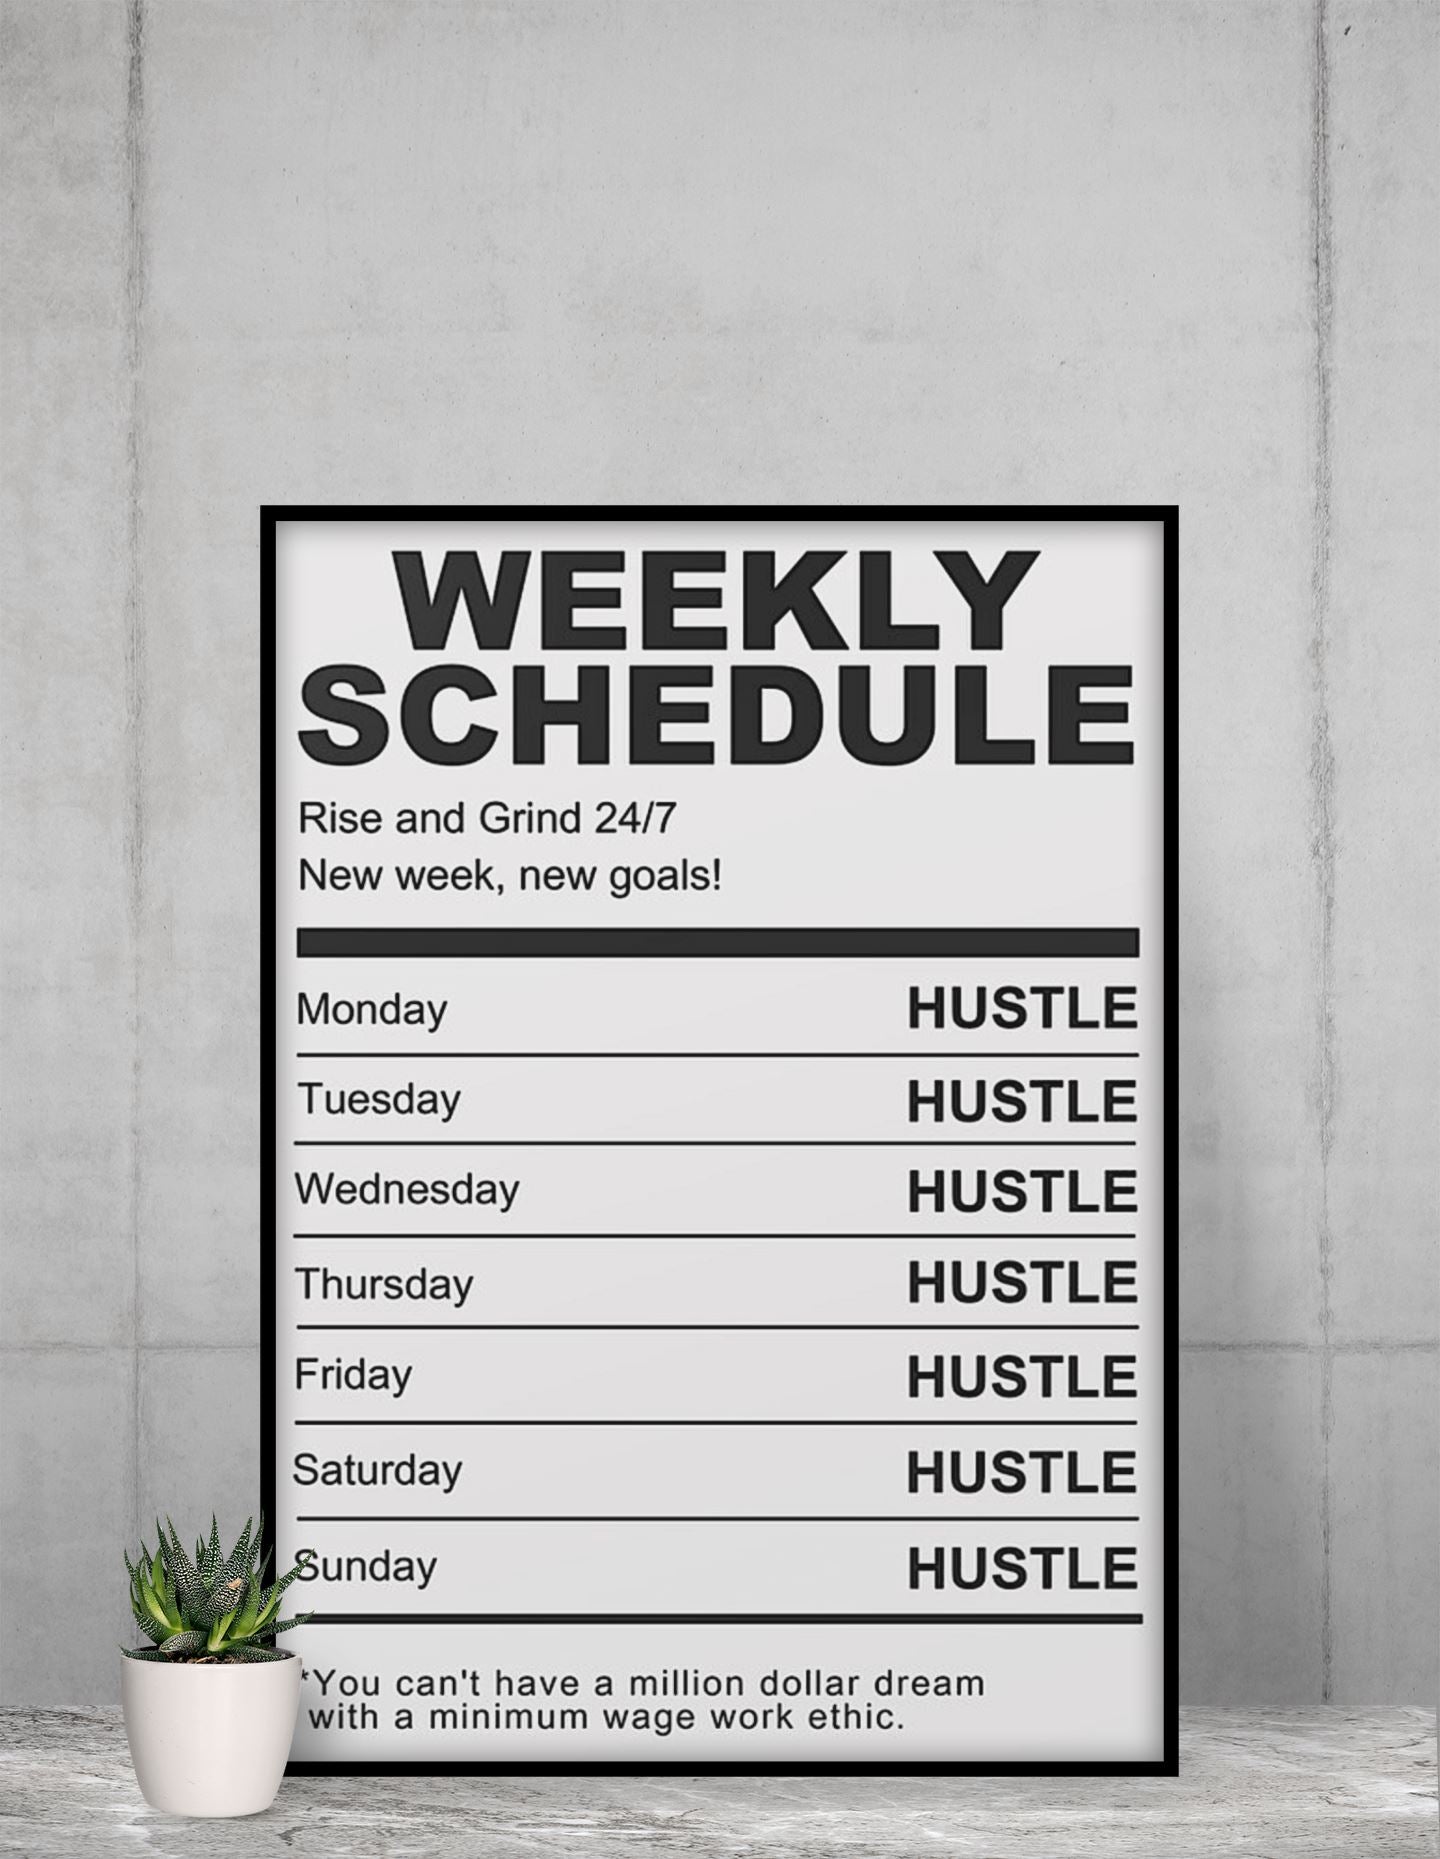 Weekly Schedule Hustle Exclusive Motivational Framed Wall Poster for Home and Office freeshipping - Catch My Drift India